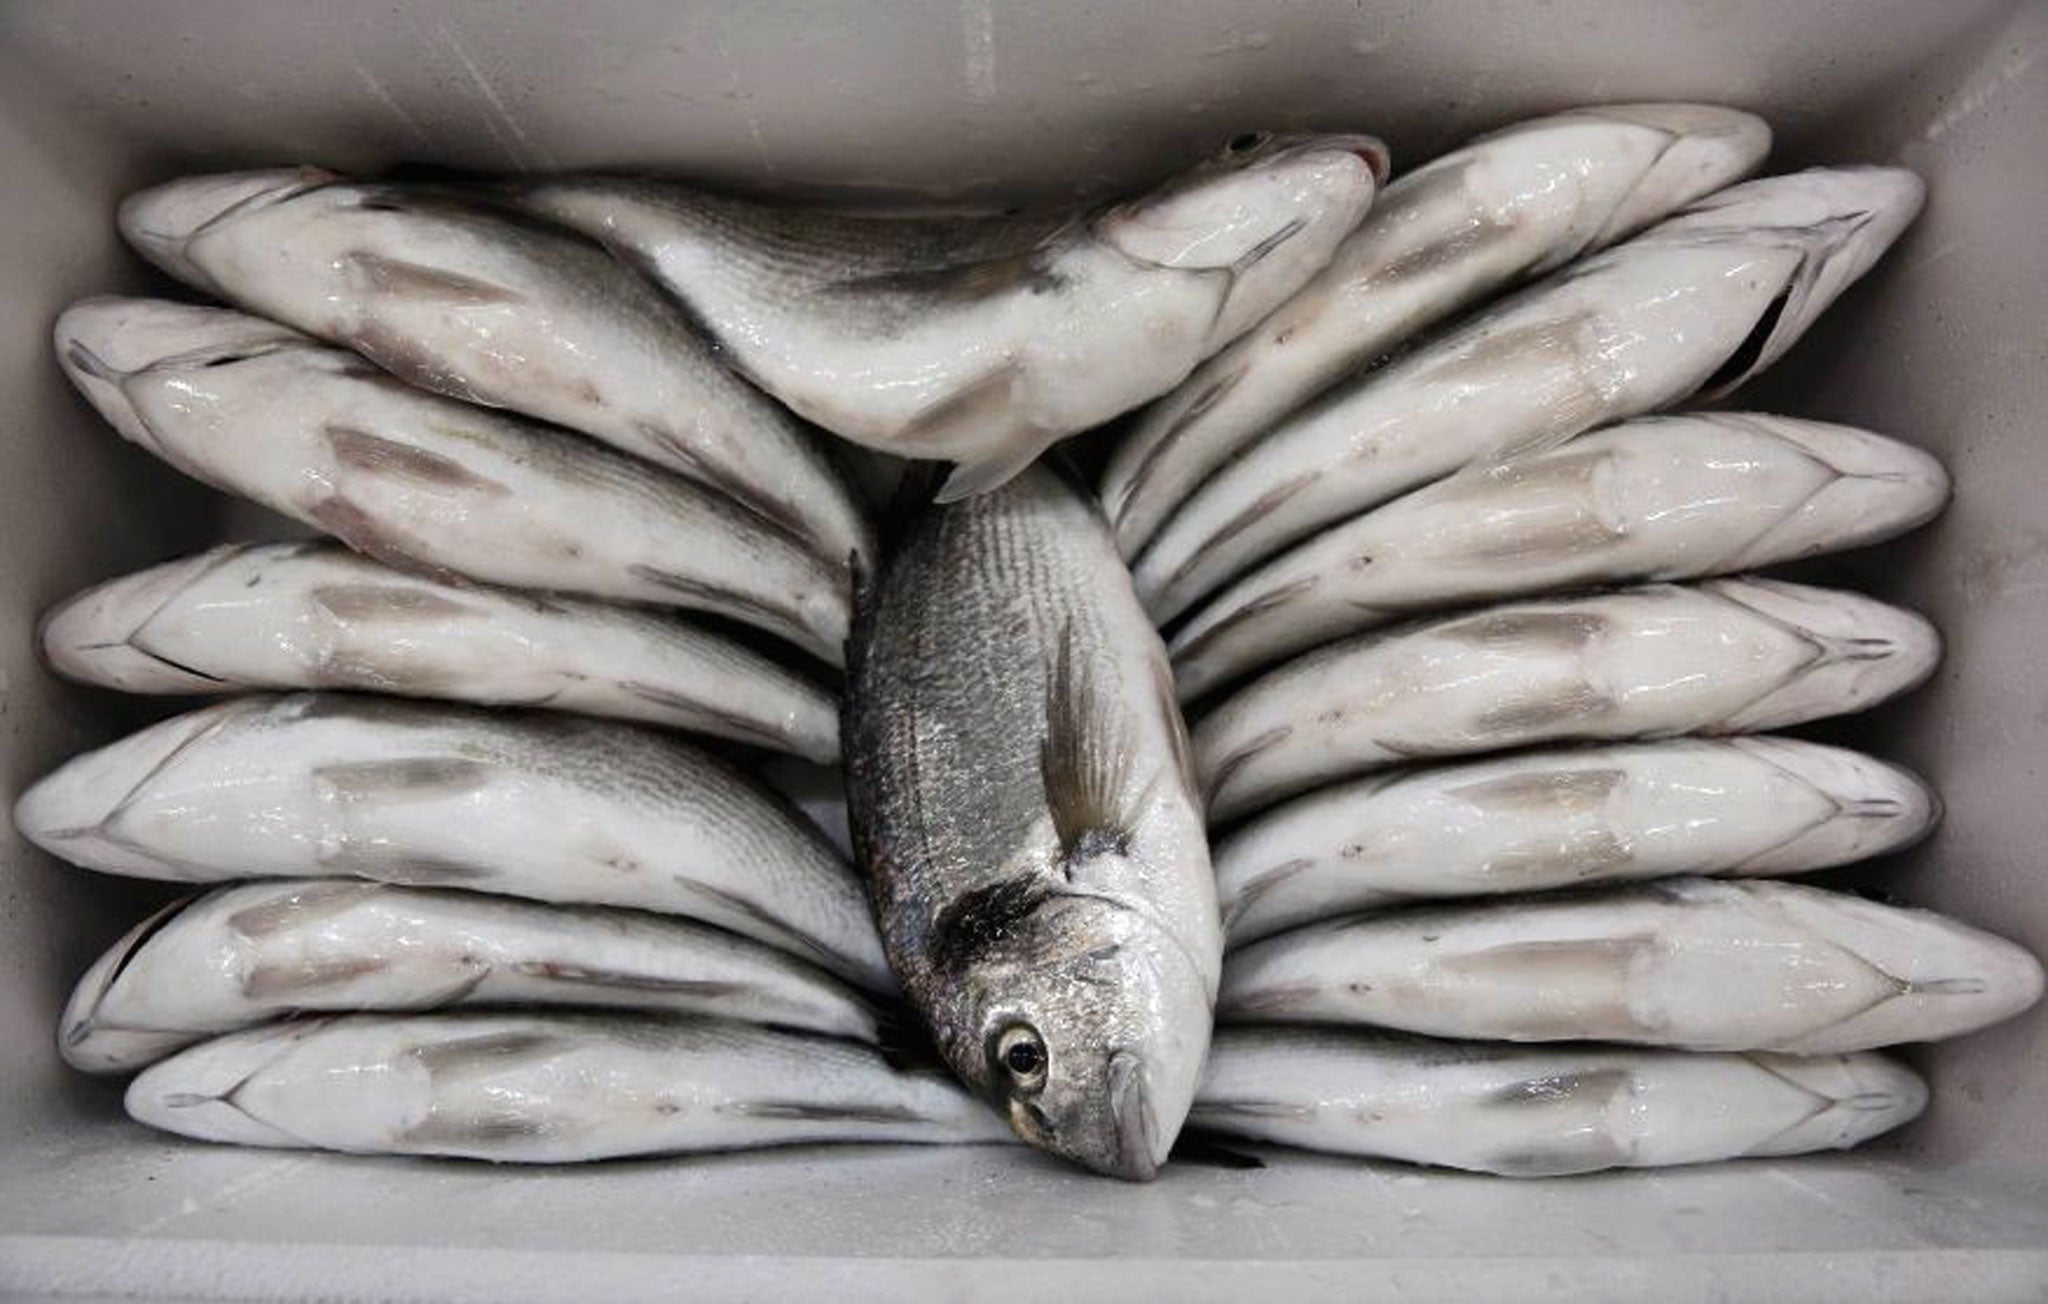 Sea bream are seen inside a thermal-insulated box